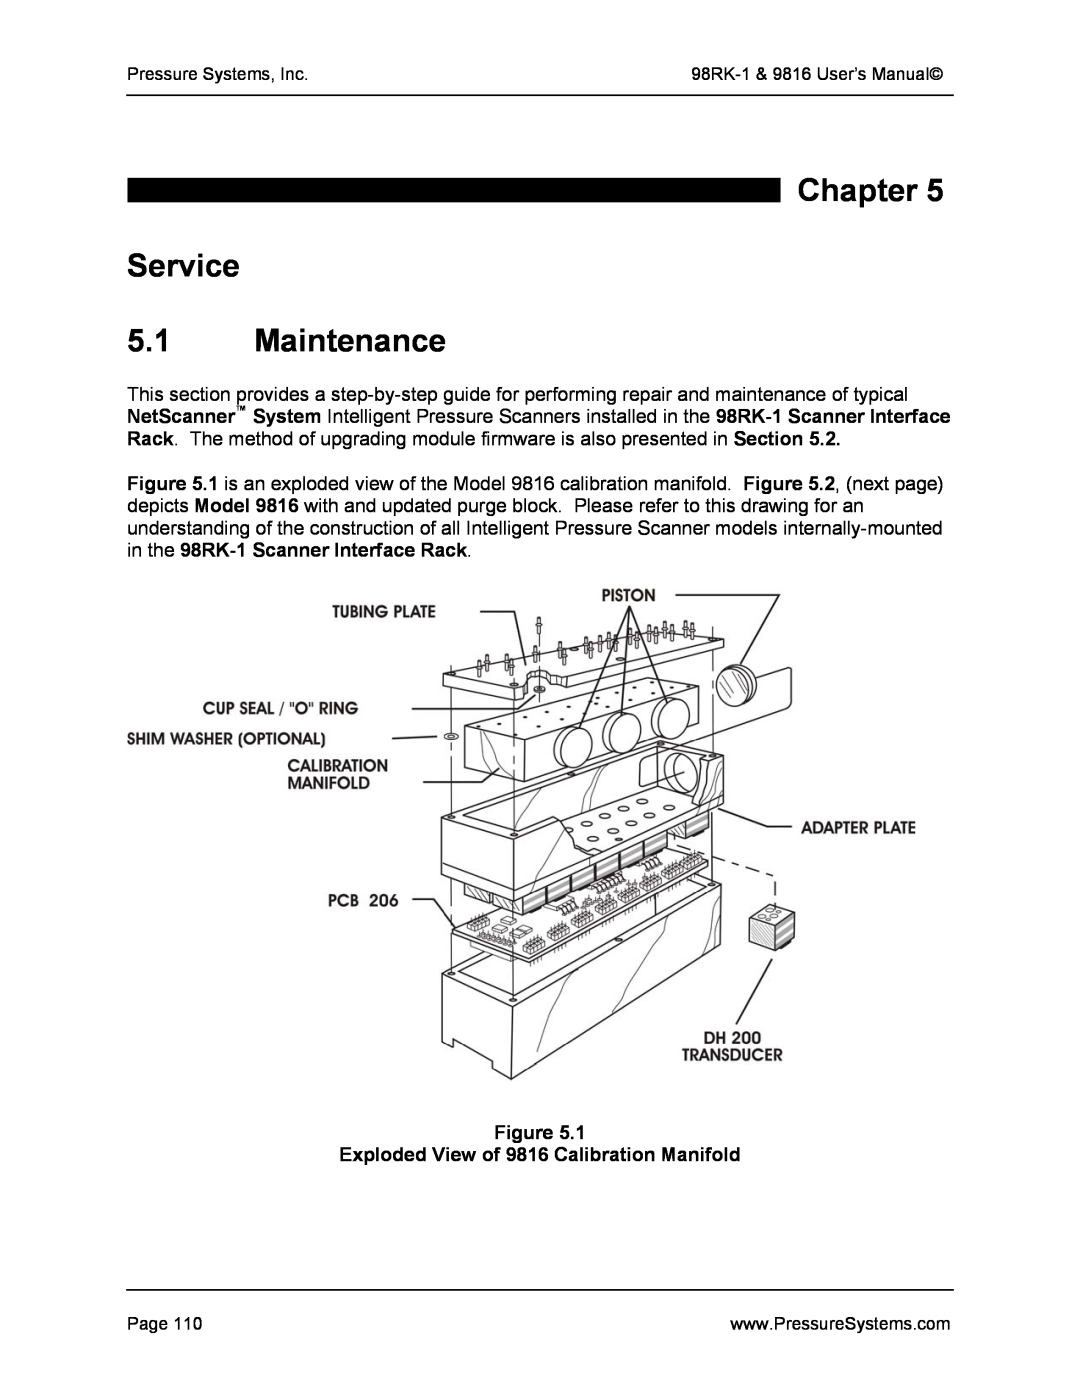 Pressure Systems 98RK-1 user manual Chapter Service 5.1 Maintenance, Exploded View of 9816 Calibration Manifold 